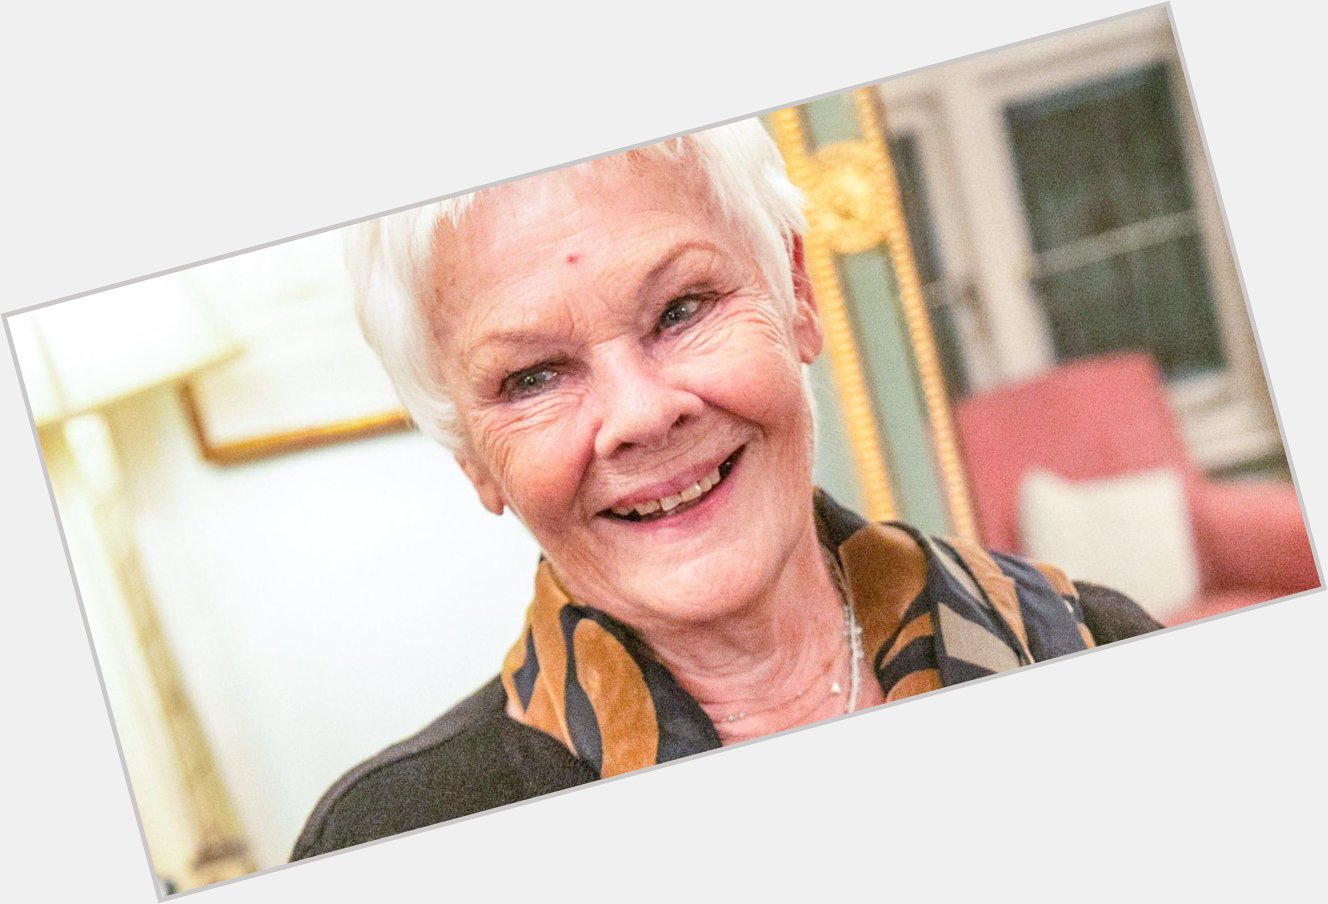 Happy birthday to the incomparable Judi Dench!  What would you love to see her in onstage next? Dan Wooller 